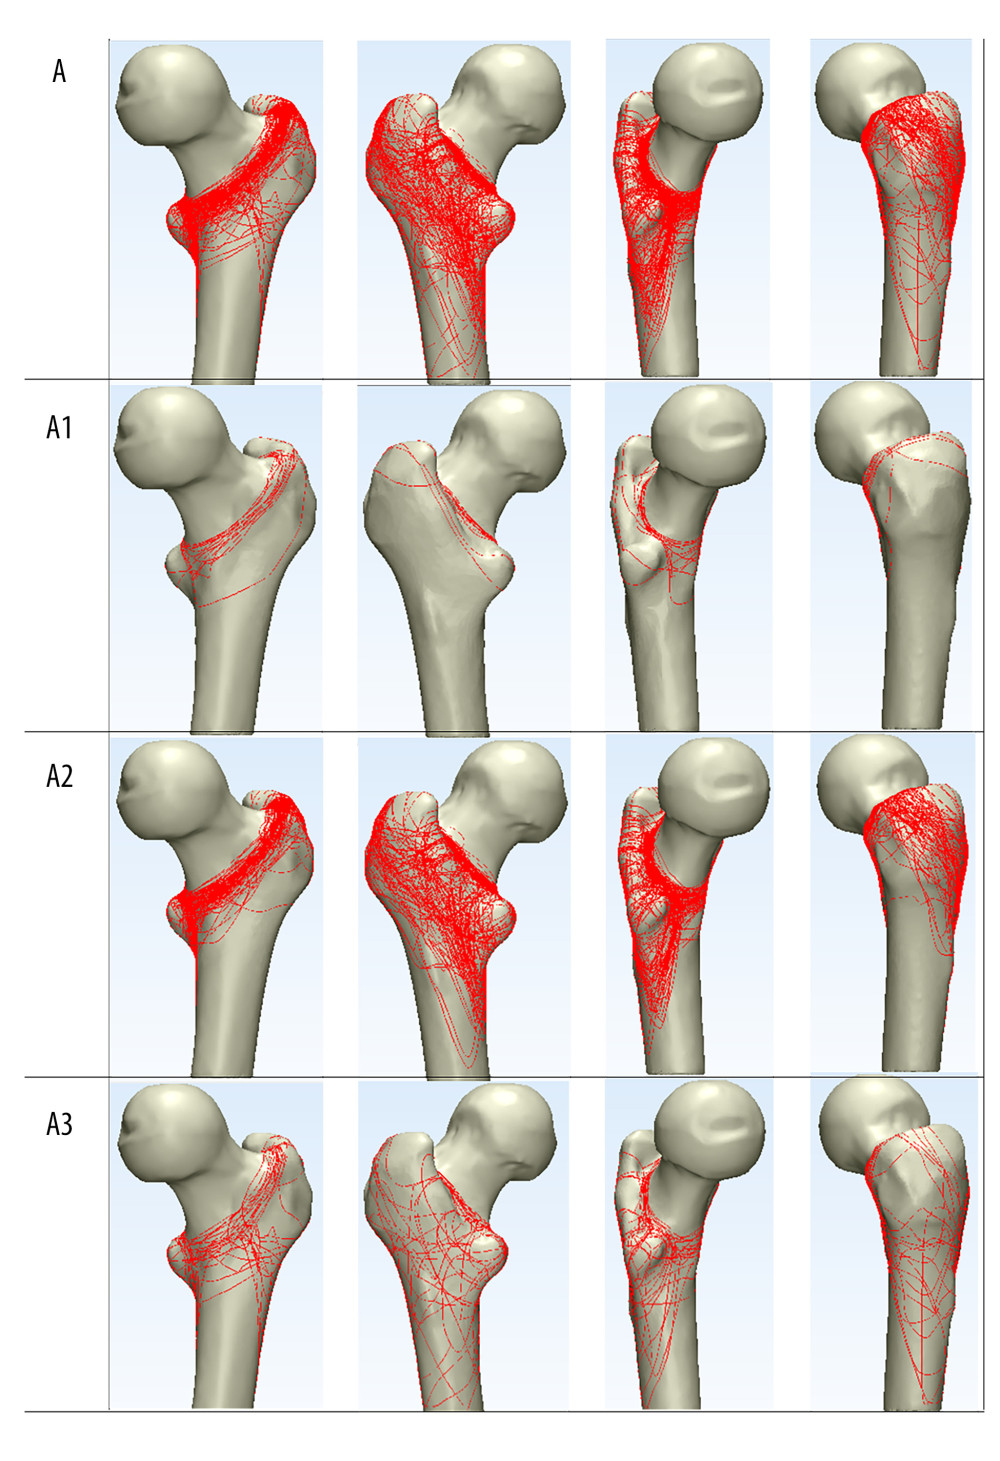 The 3D fracture mappings of intertrochanteric fractures in 4 views. The 115 elderly patients were classified based on the AO fracture classification system. “A” represented the pooled analysis of all fracture fragment, while expressions are for 3D fracture mappings of subtypes (including types A1, A2, and A3).